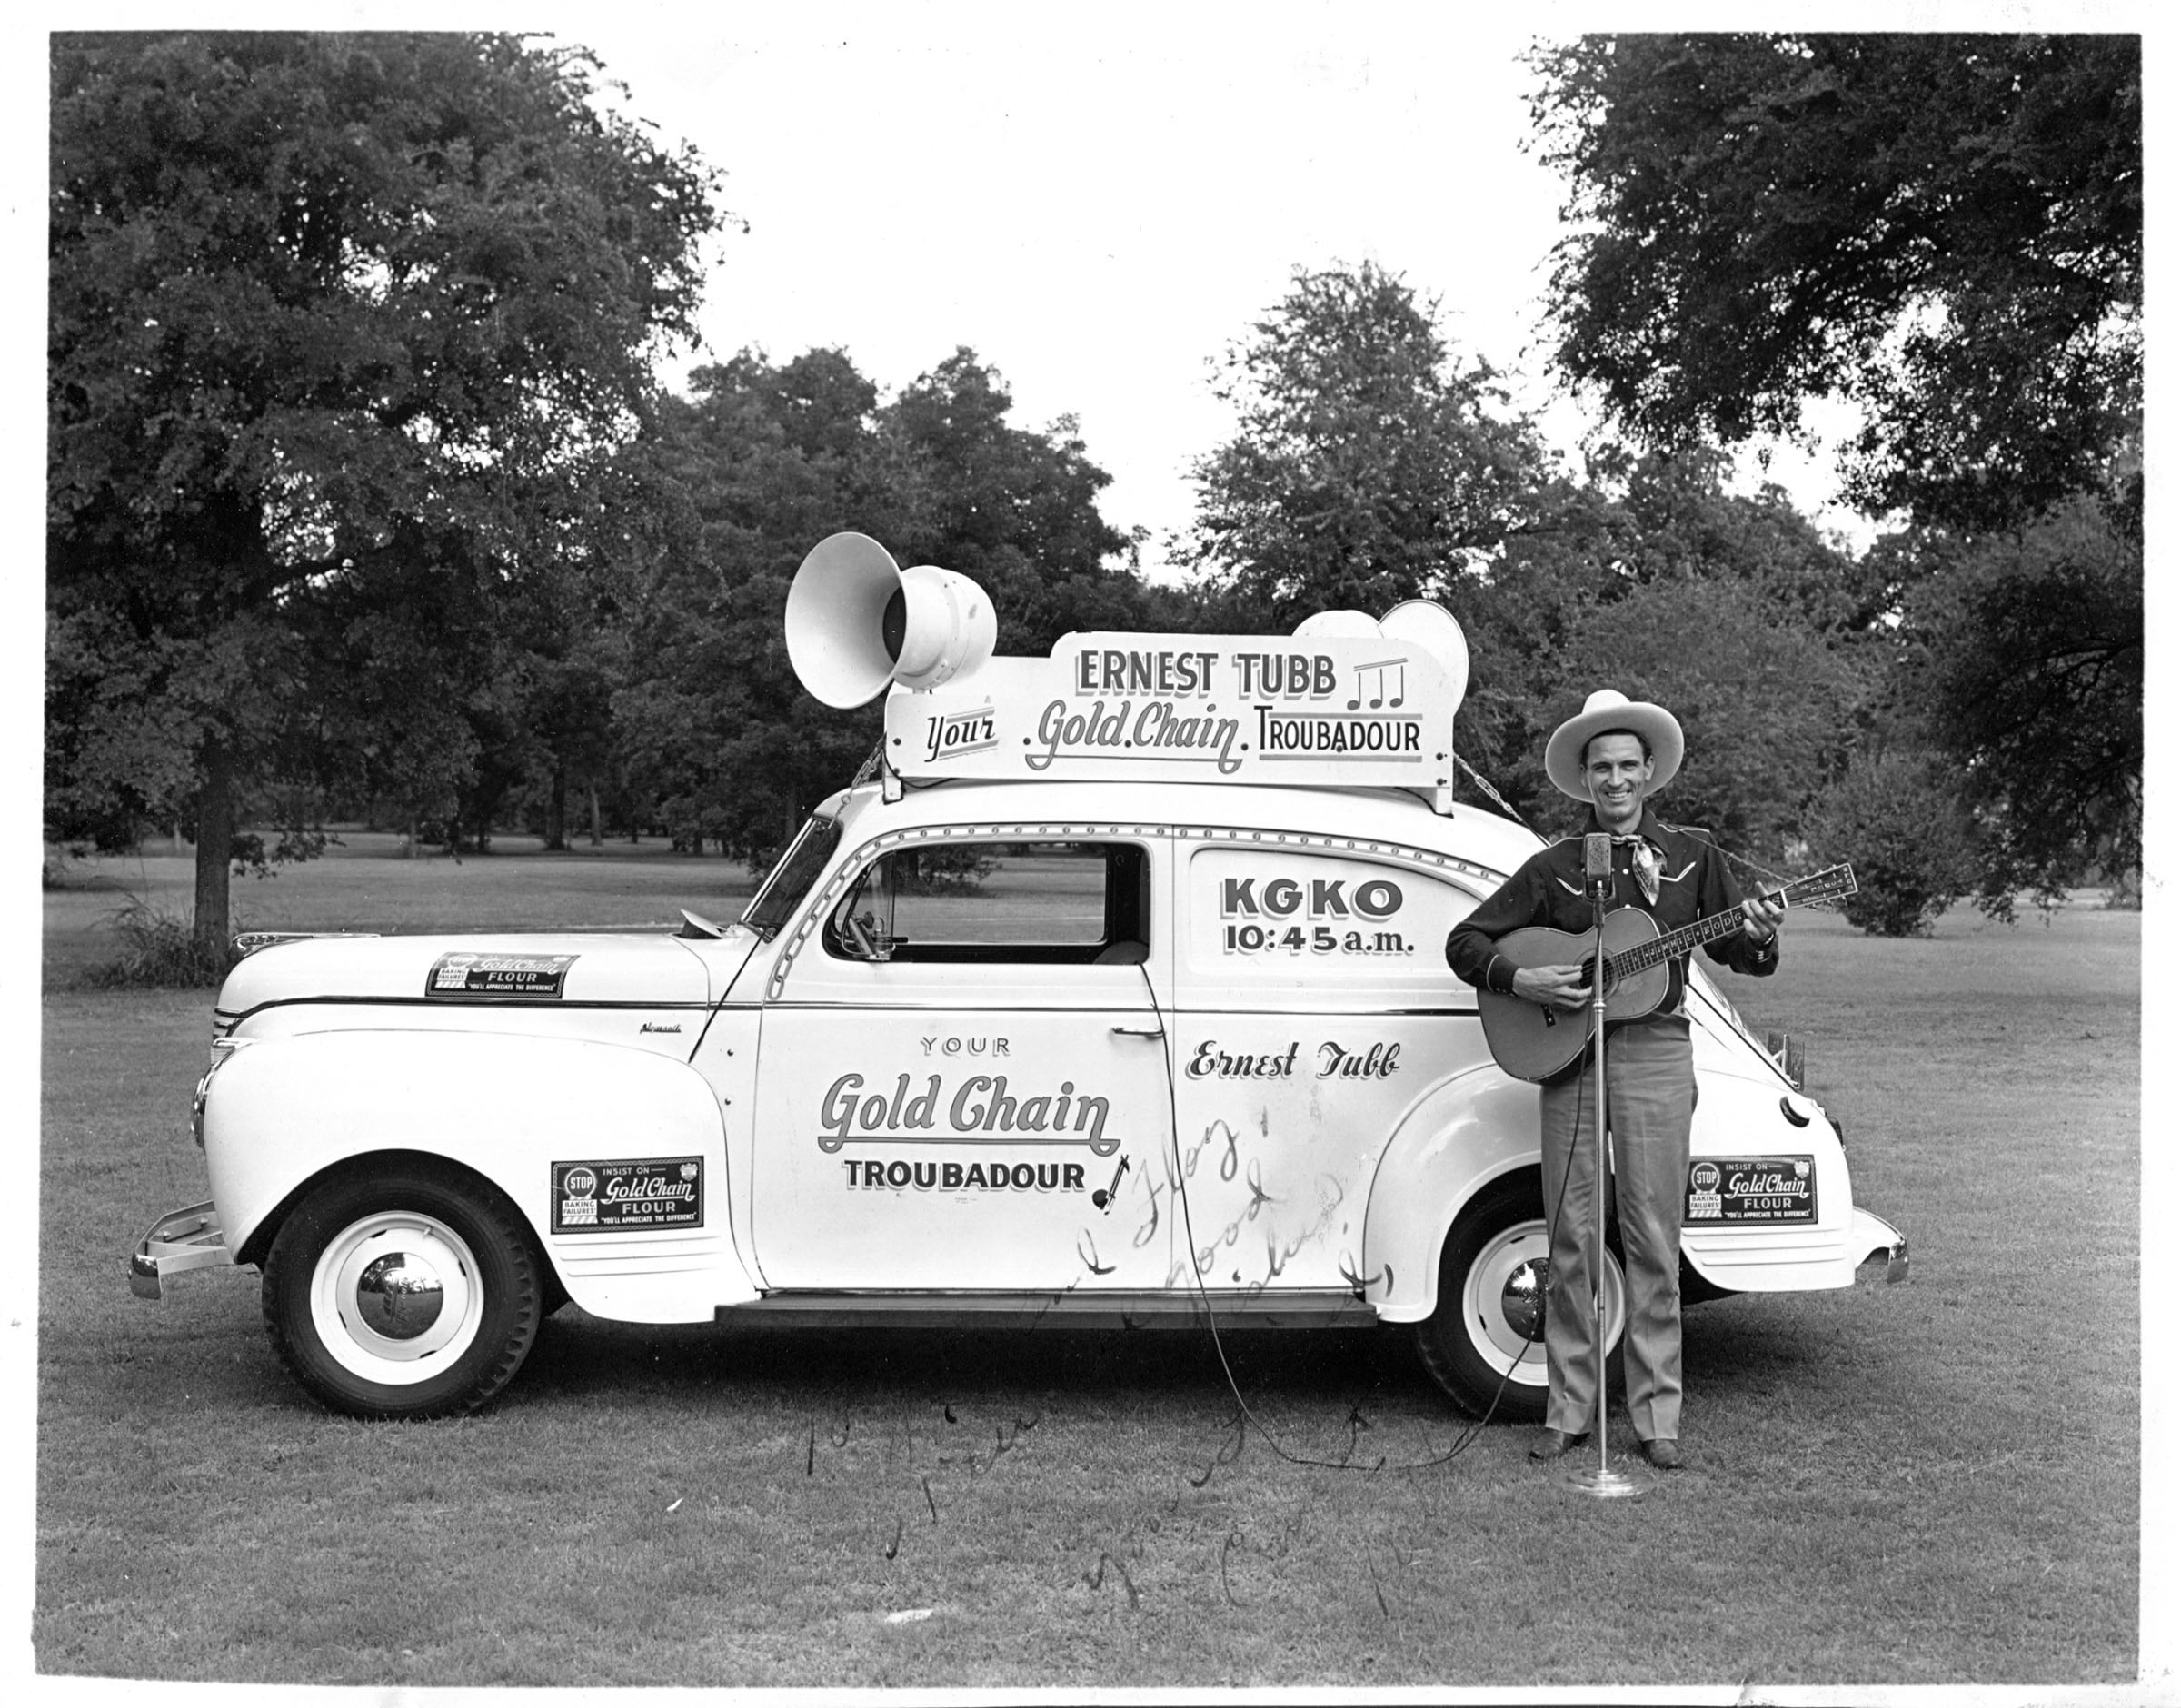 A man stands next to an old car decorated with music insignia